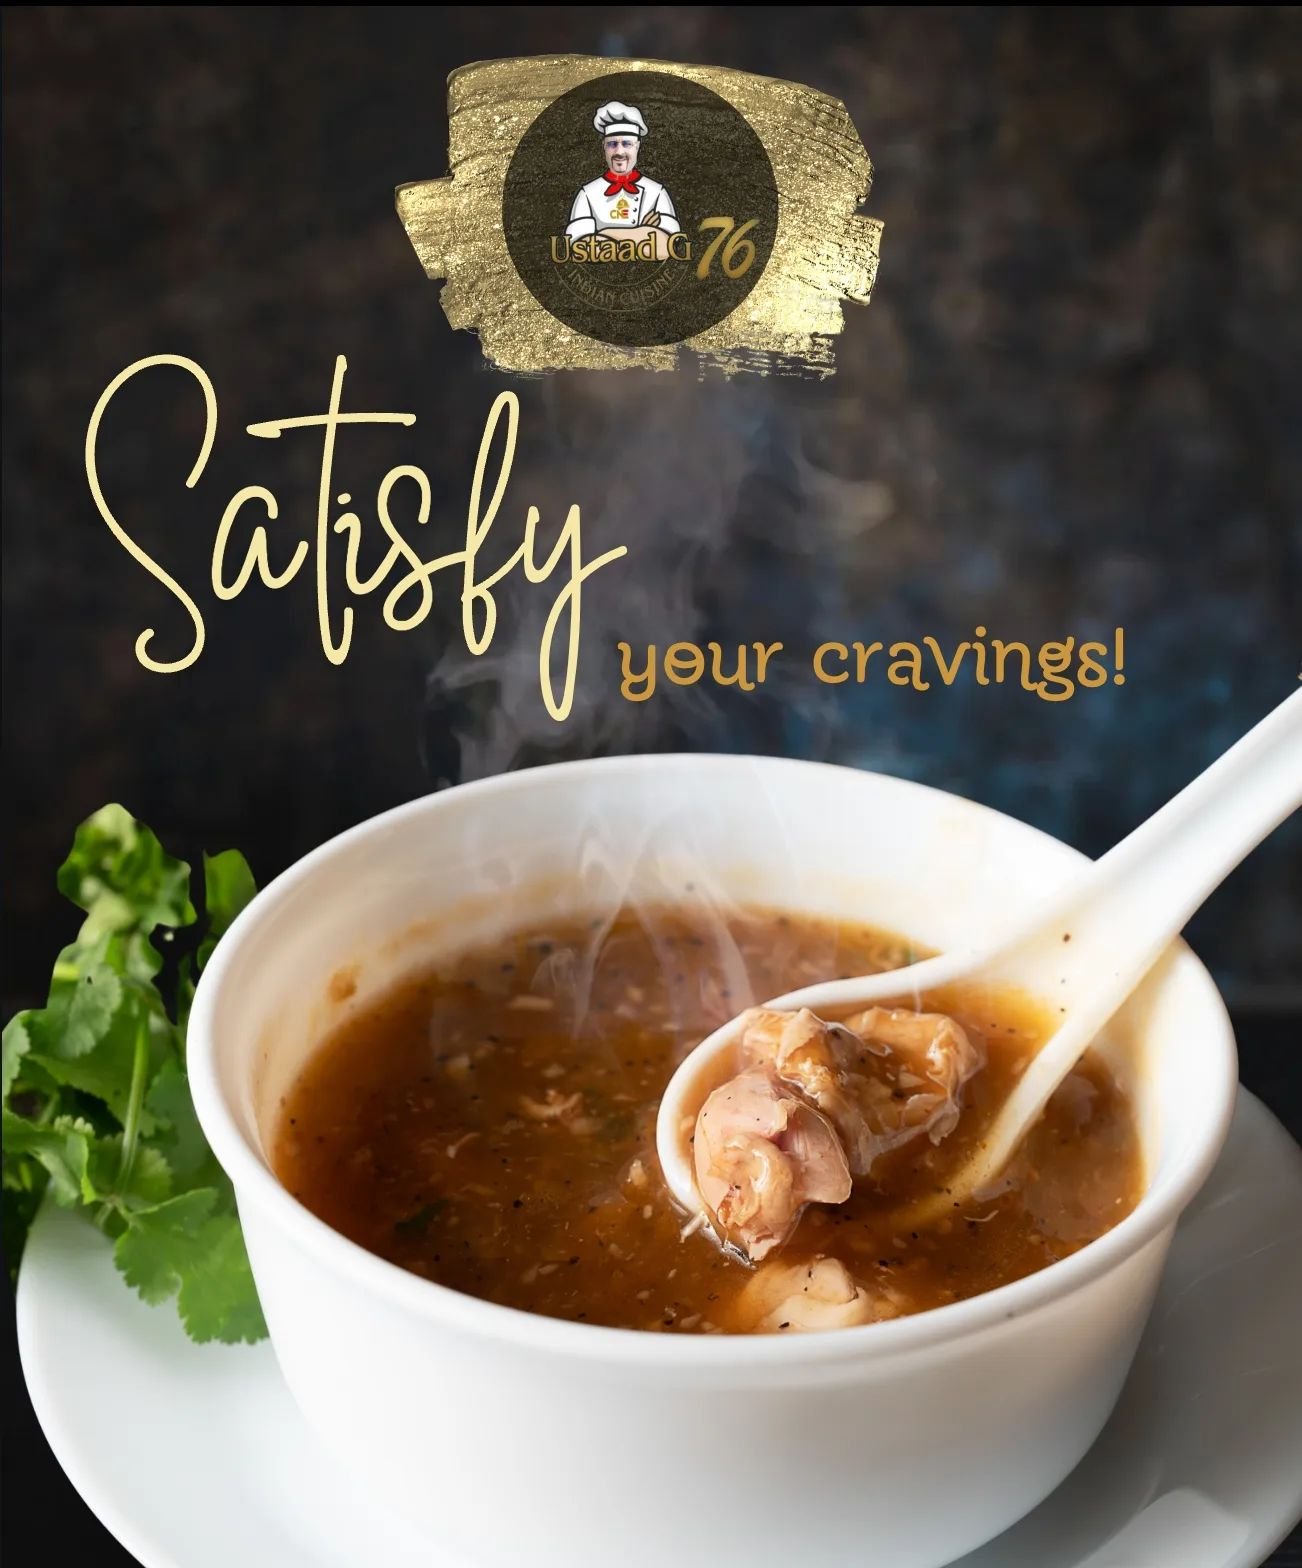 Indulge in warmth at Ustaad G76 this rainy season in BC with our soul-soothing range of soups, crafted to perfection for cozy evenings.
As the chilly raindrops dance outside, step into our cozy haven where warmth and flavour unite in every spoonful. 